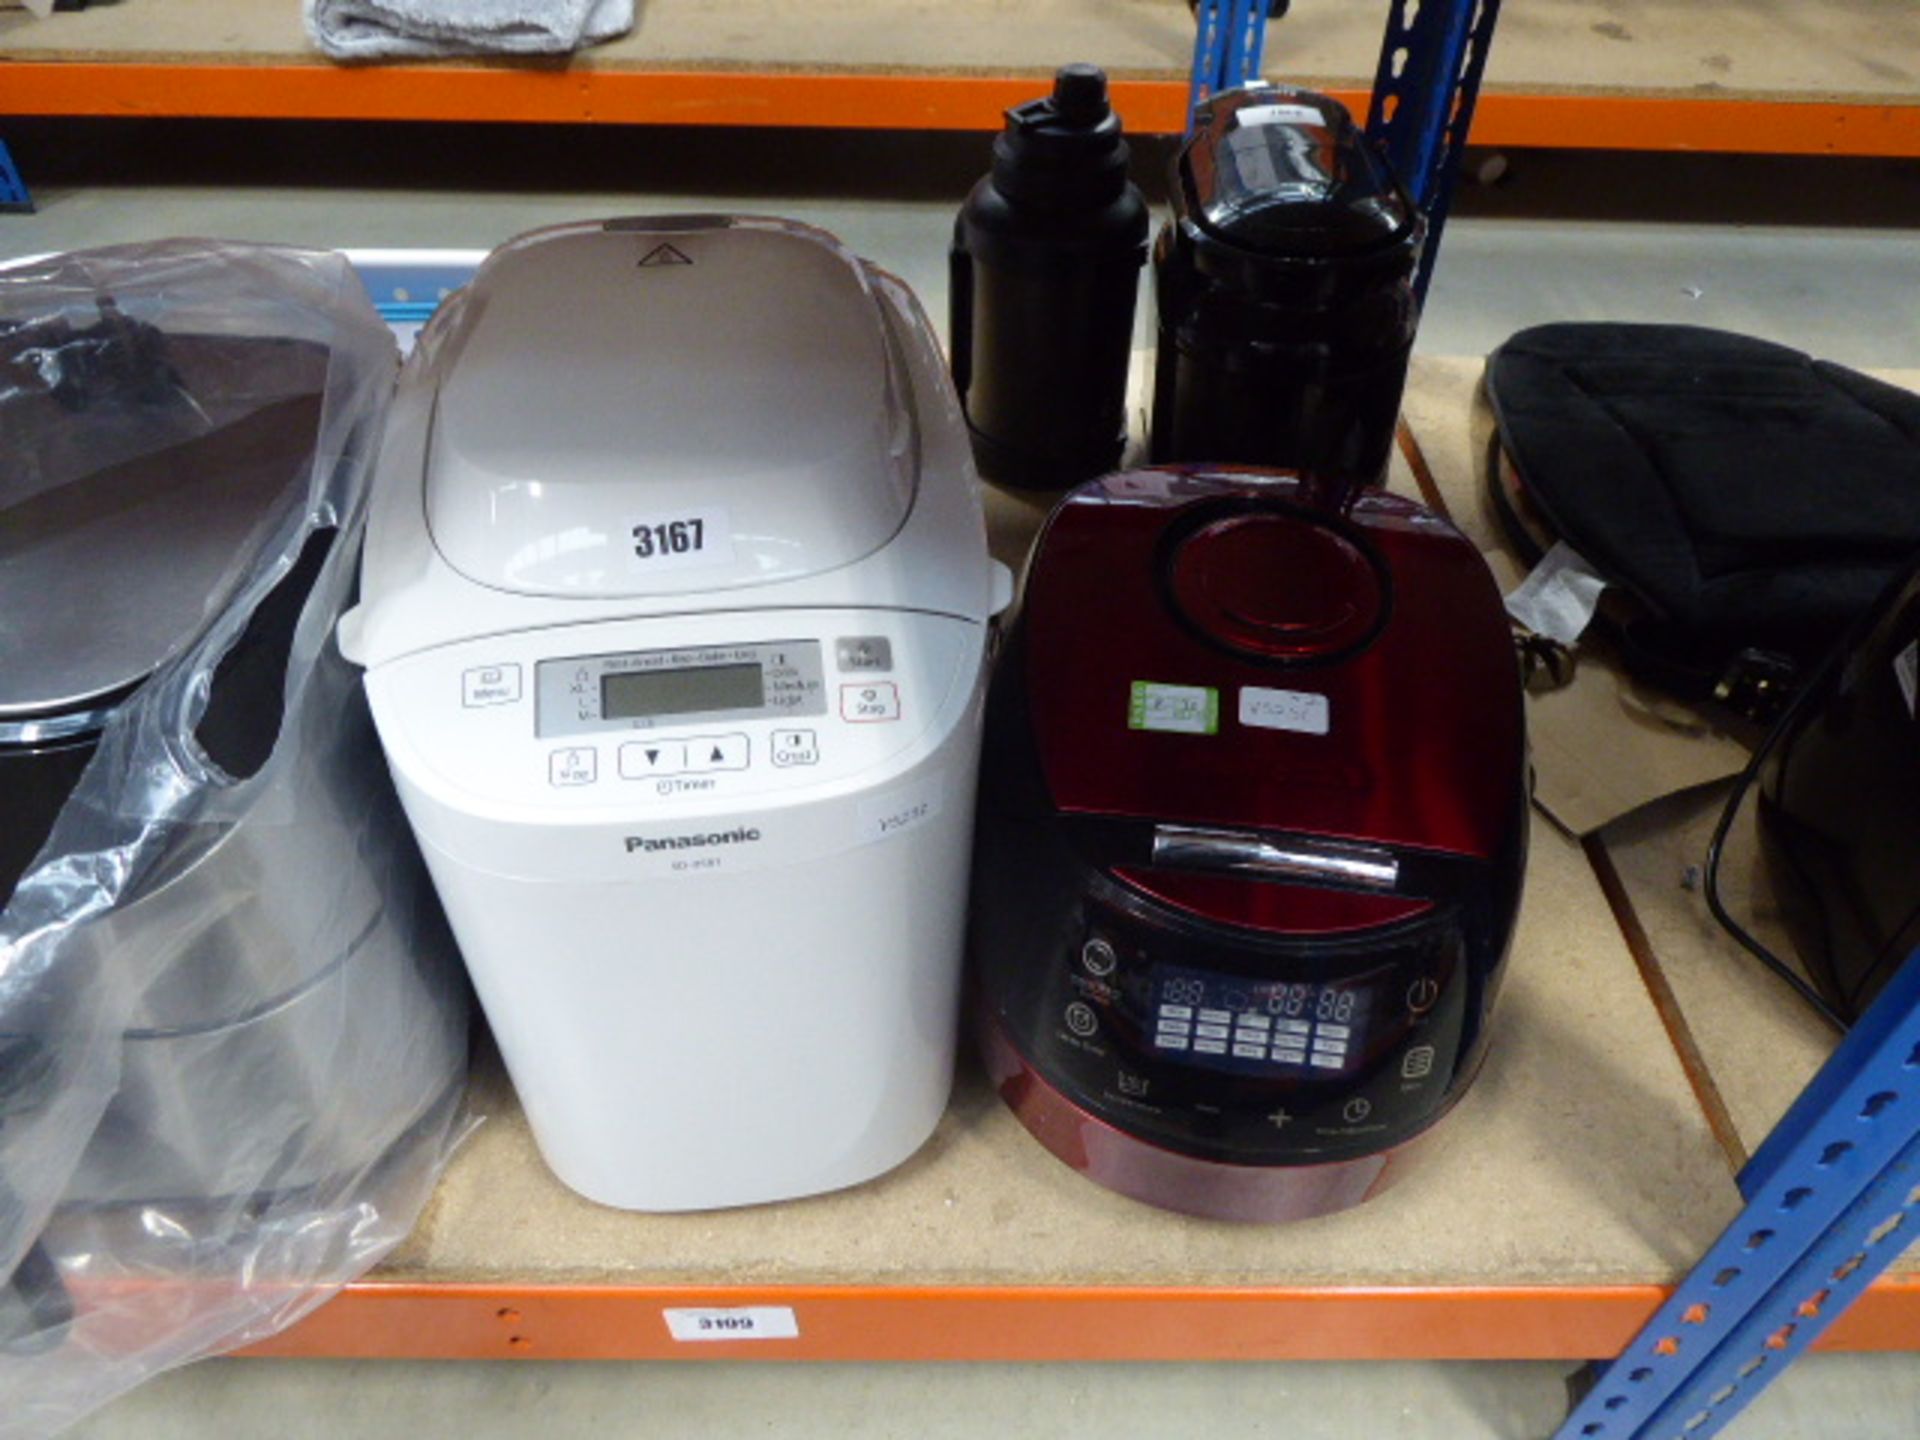 (TN72) Panasonic automatic breadmaker and a Drew & Cole fryer (both unboxed)